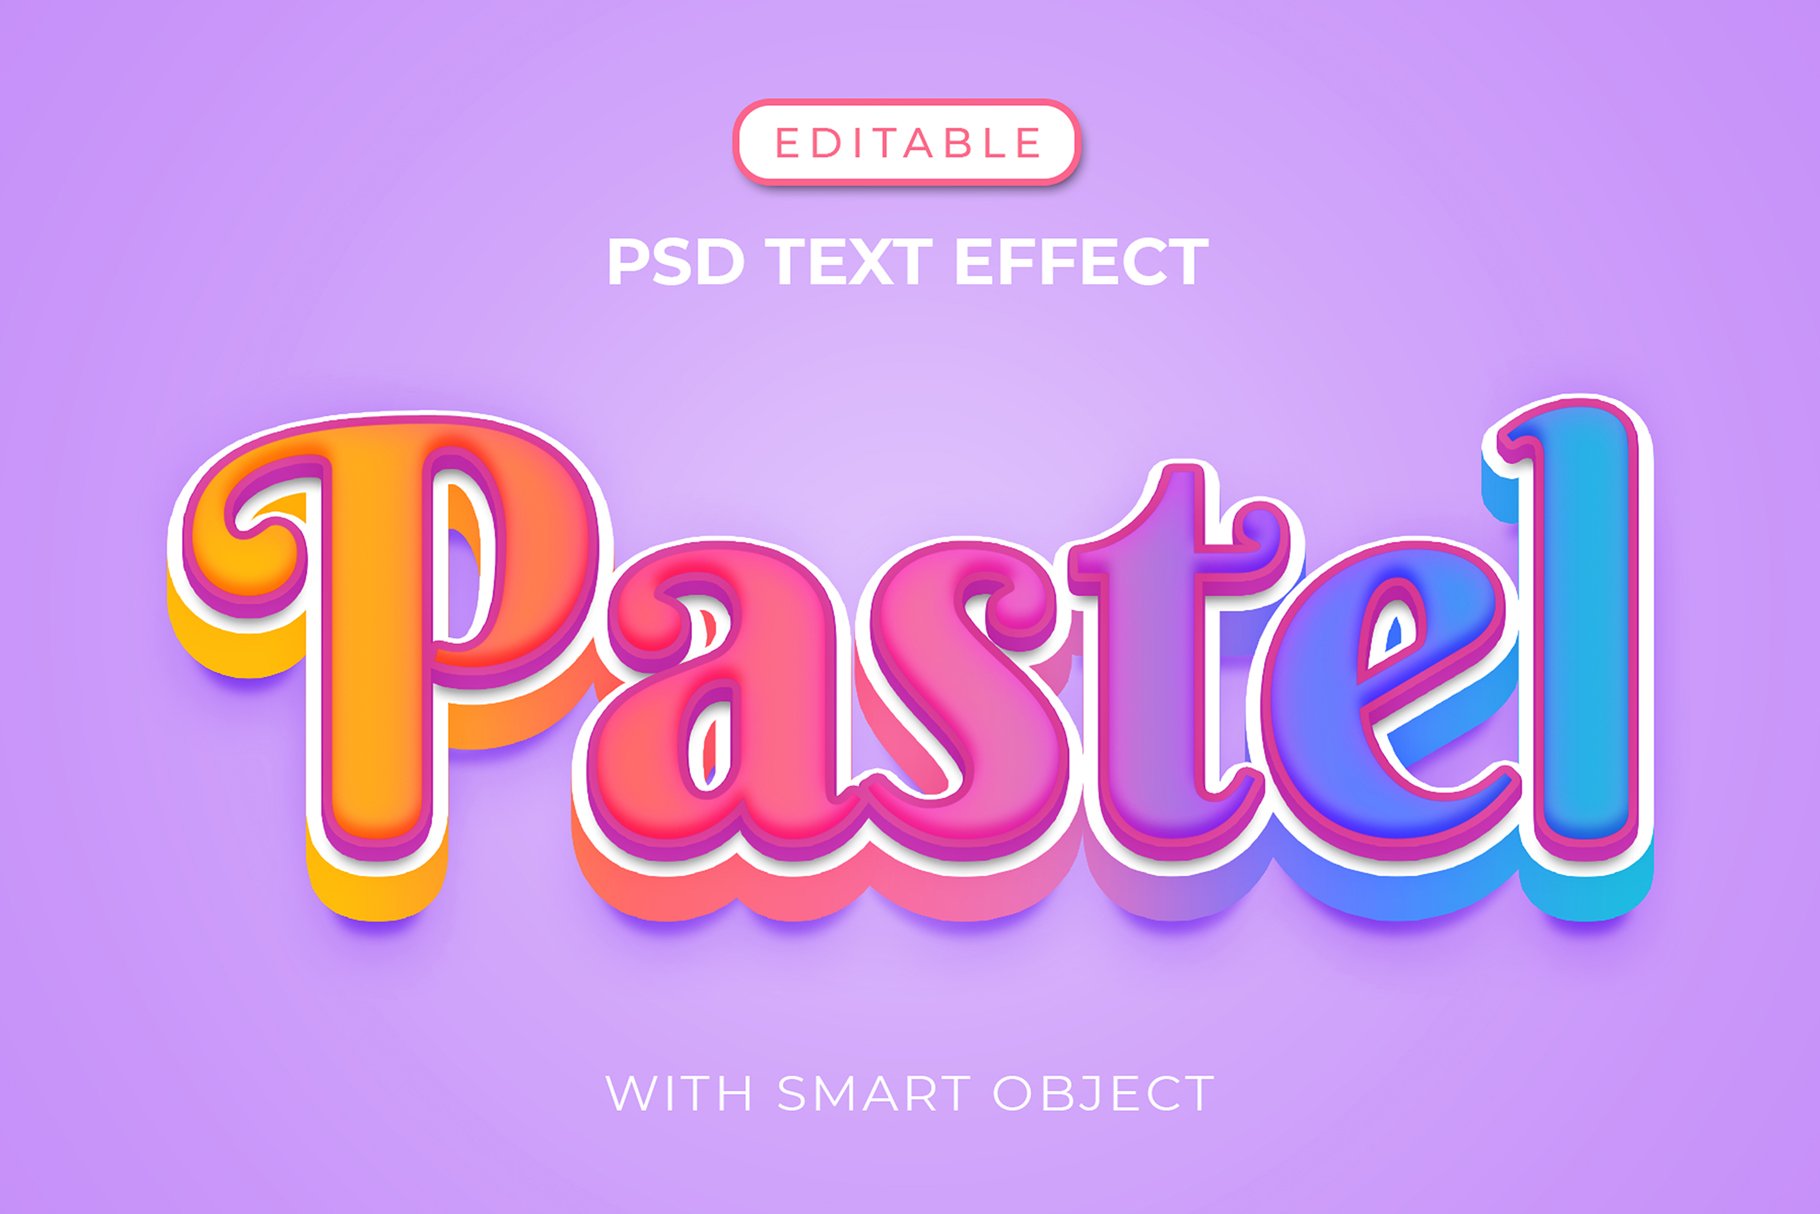 Pastel Text Effect with Cute Colorcover image.